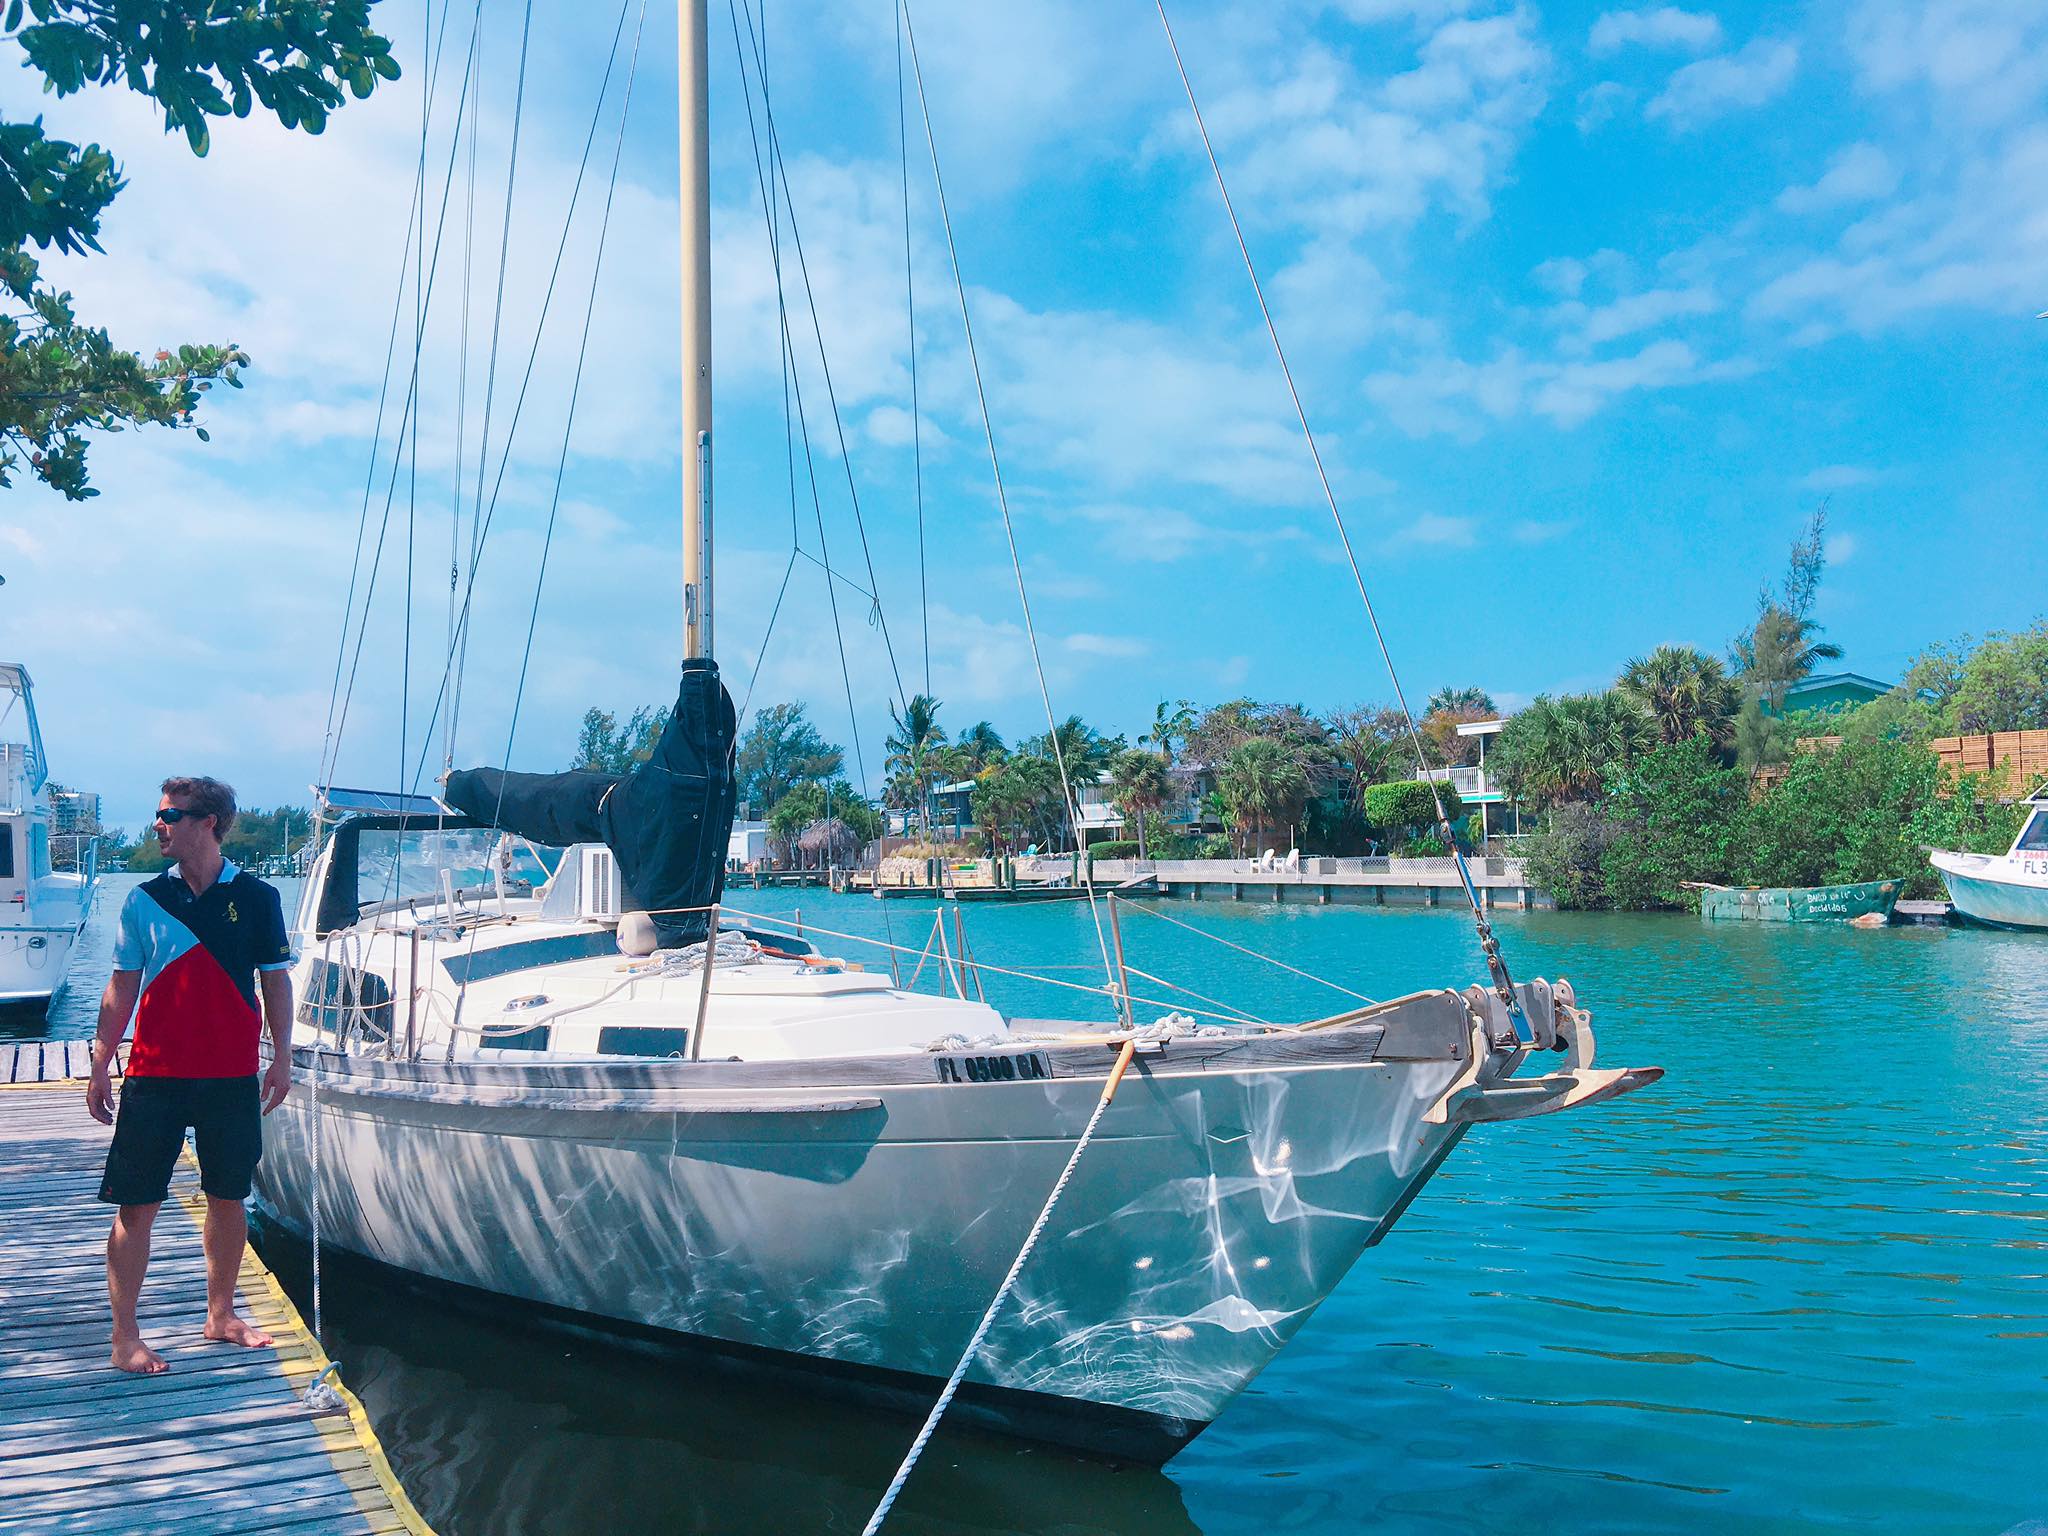 Refitting our Sailboat Interior: From an Antique Sailboat to a Floating  Miami Beach House Style